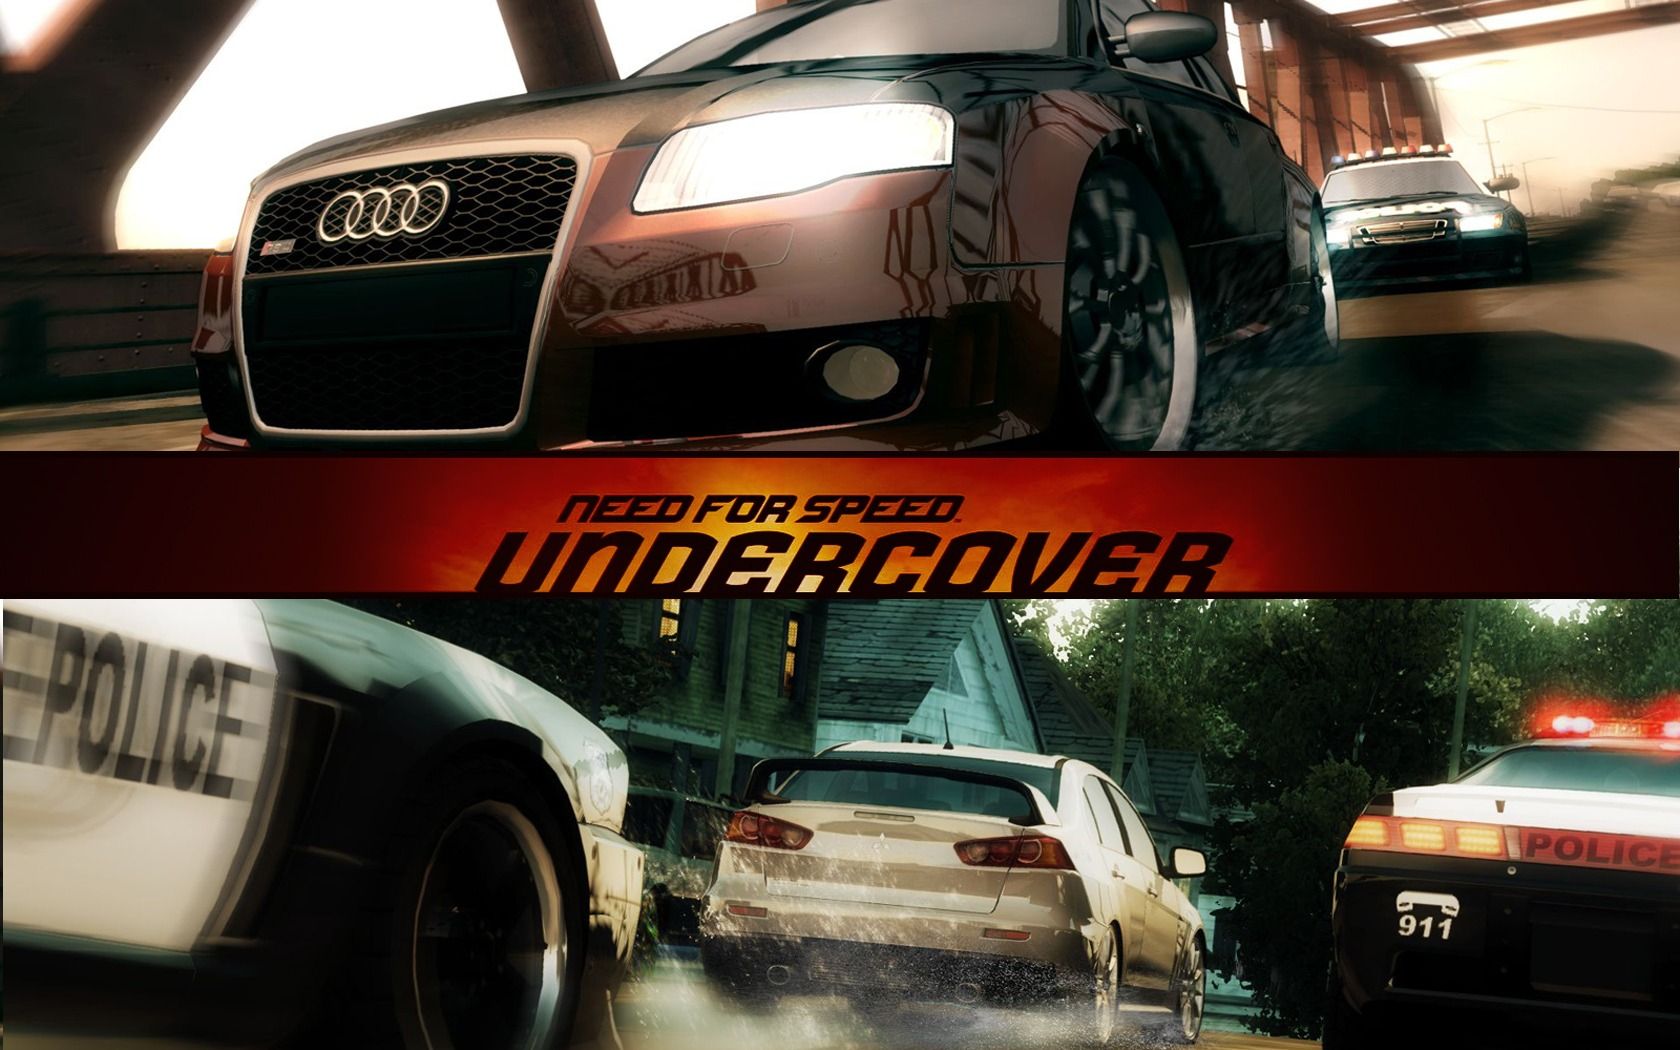 Need For Speed Undercover Wallpaper NFS Undercover Games Wallpaper in jpg format for free download